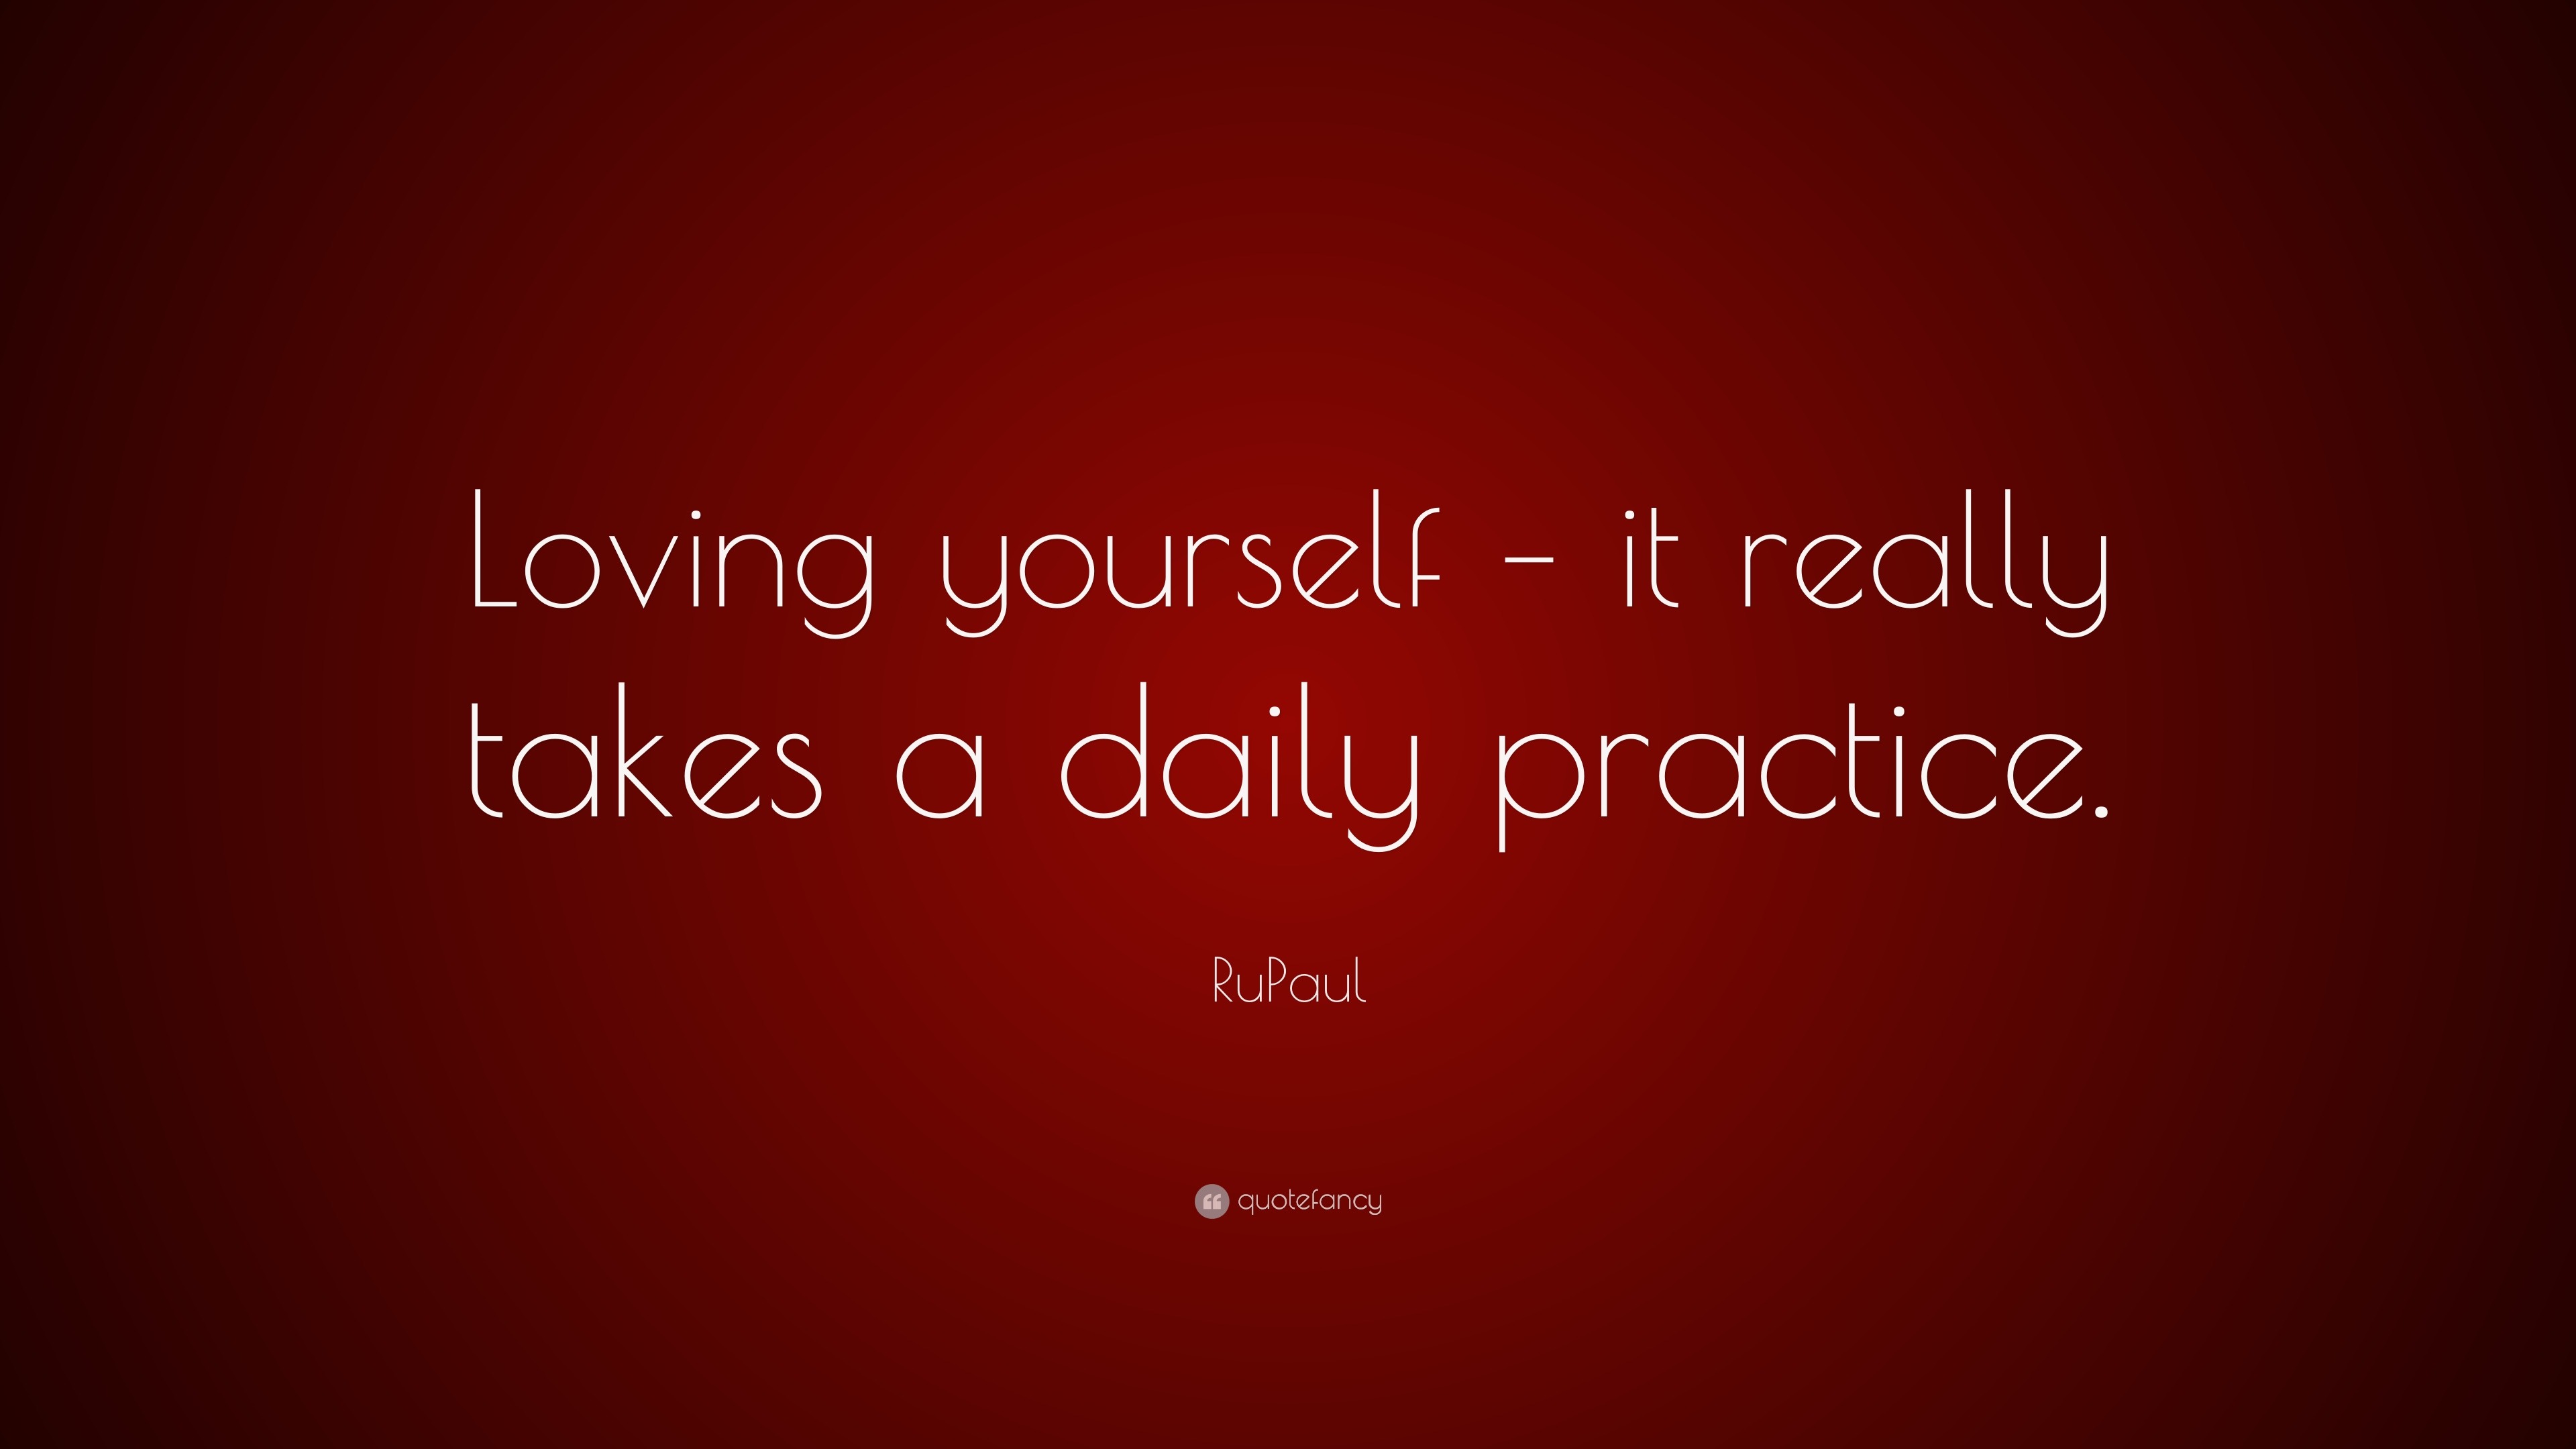 Loving yourself - it really takes a daily practice. 